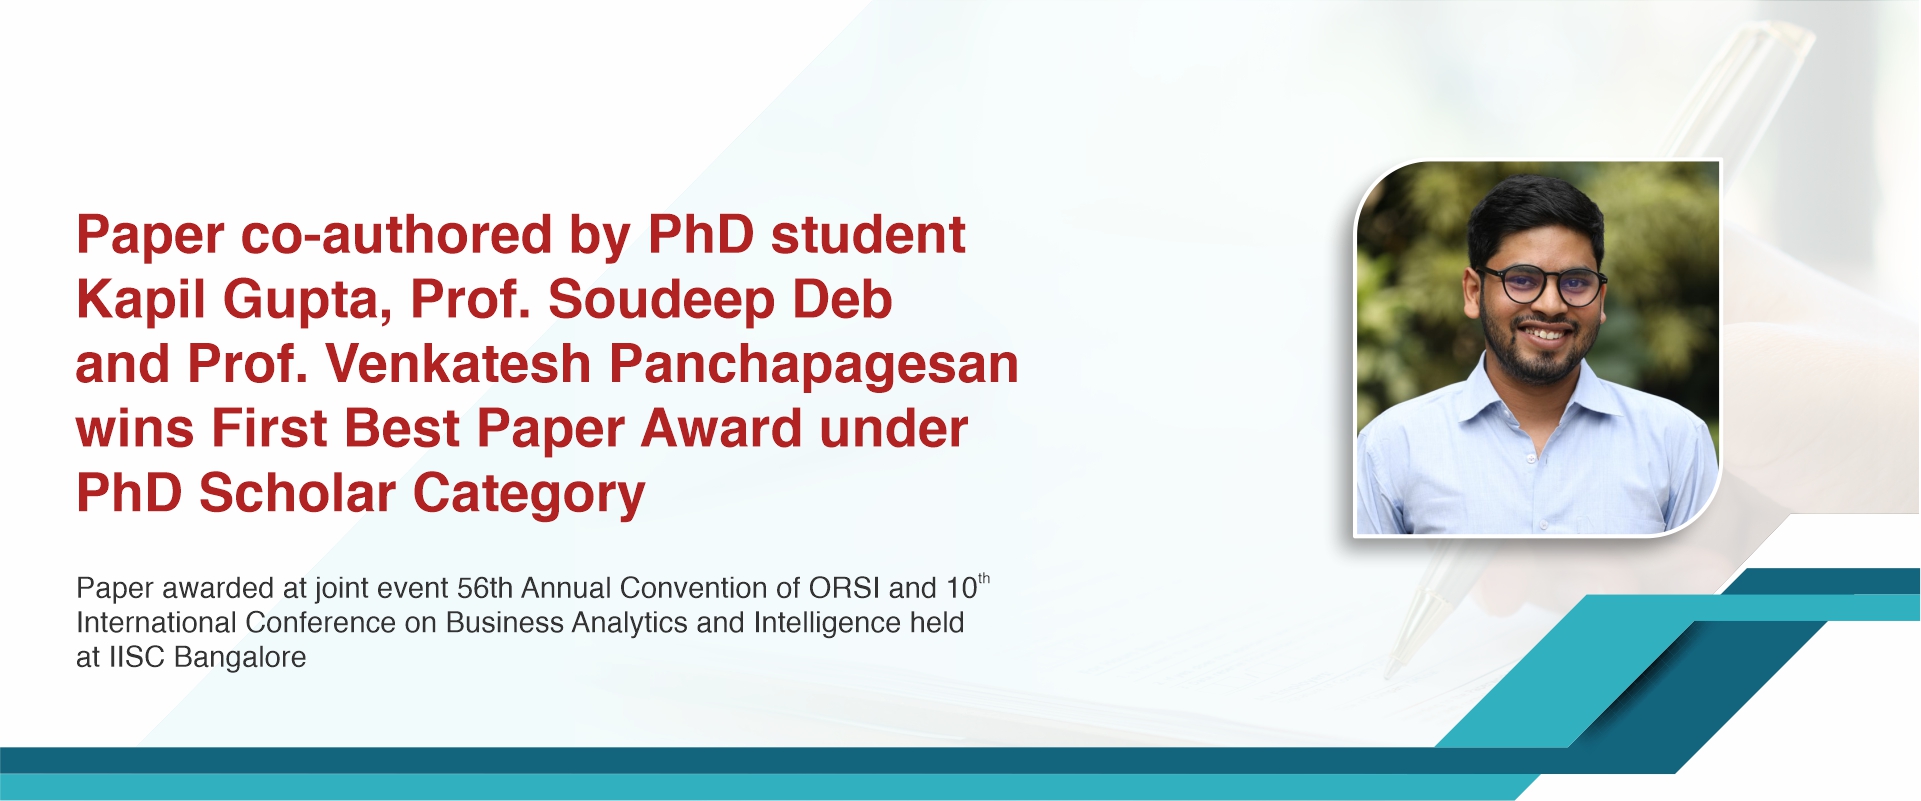 Paper co-authored by PhD student Kapil Gupta, Prof. Soudeep Deb and Prof. Venkatesh Panchapagesan wins First Best Paper Award under PhD Scholar Category